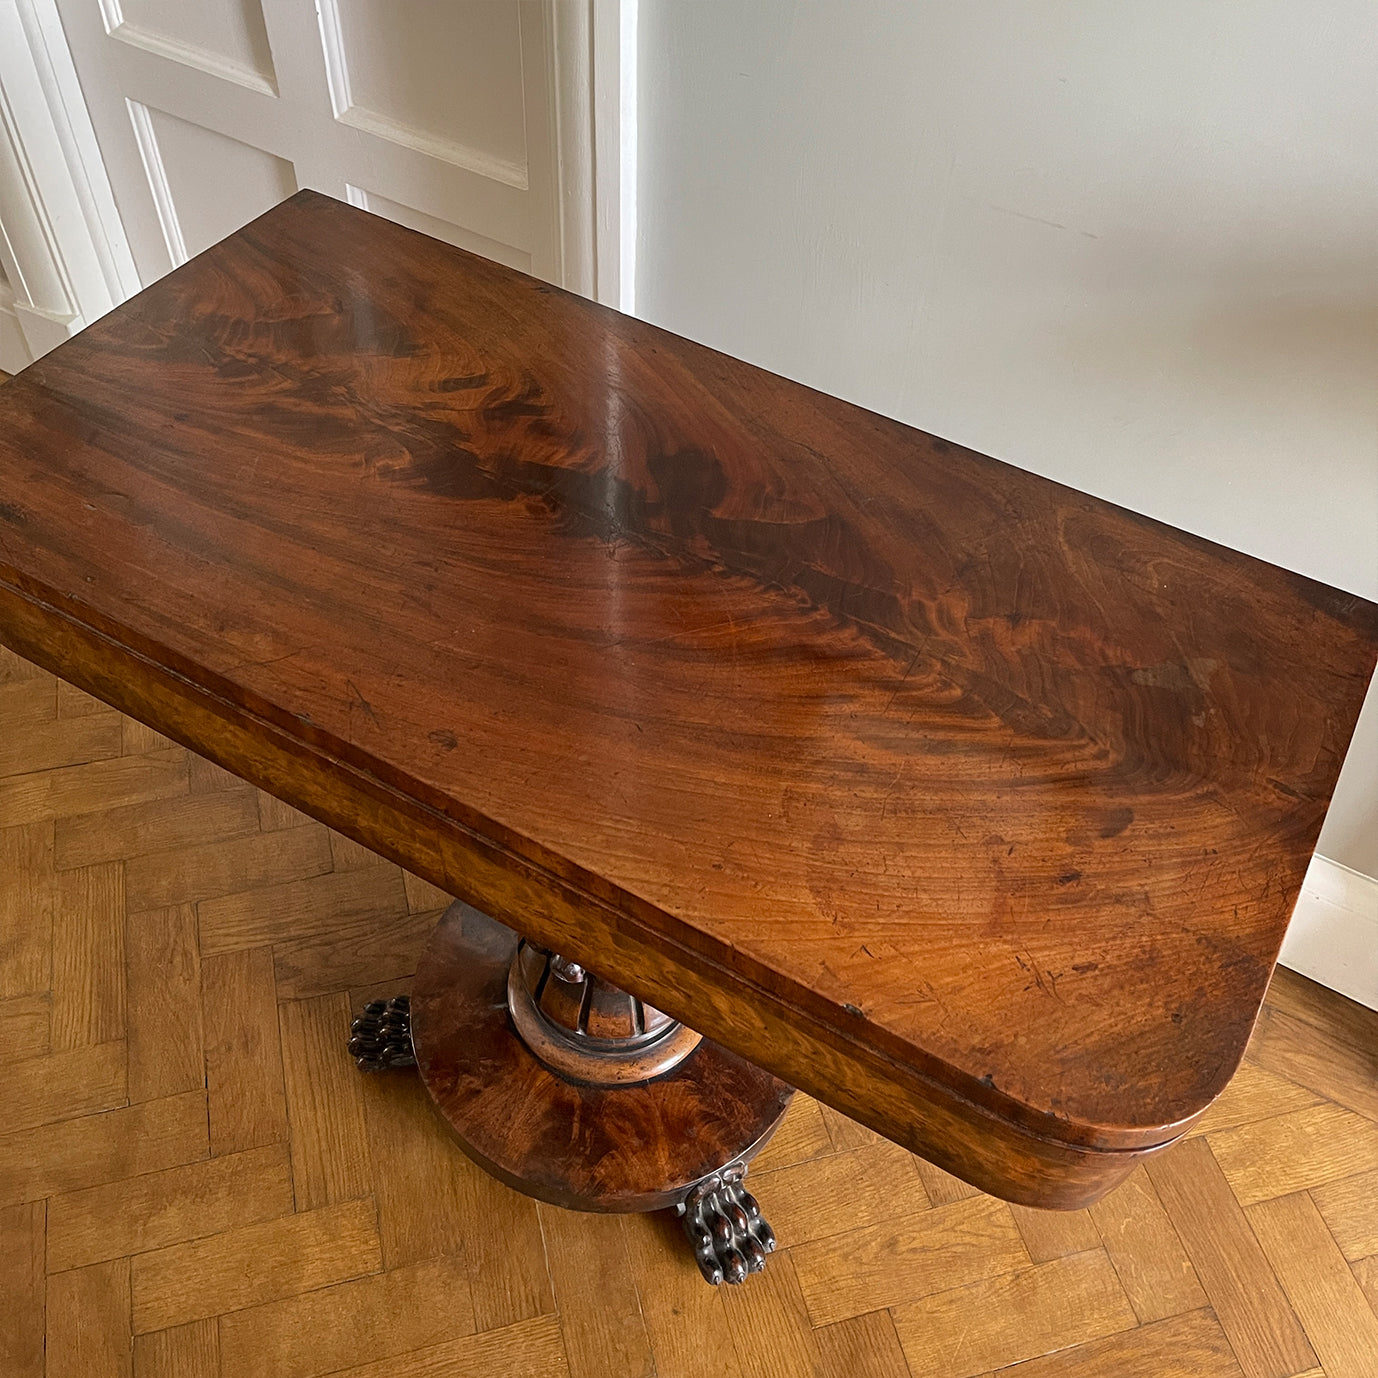 A quality William IV Mahogany Card Table with well carved detail to the solid mahogany pedestal leading to shaped collar with circular base and carved paw feet with original castors. - SHOP NOW - www.intovintage.co.uk